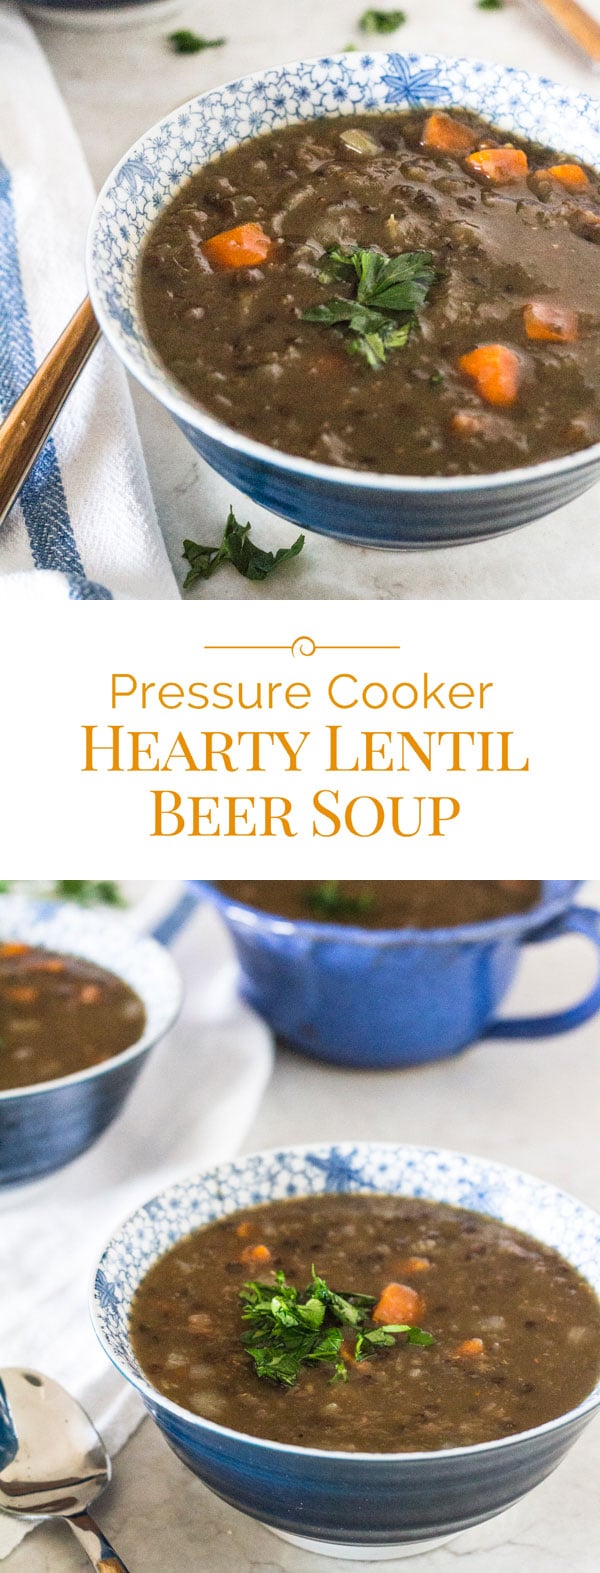 Vegetarian hearty lentil beer soup photo collage